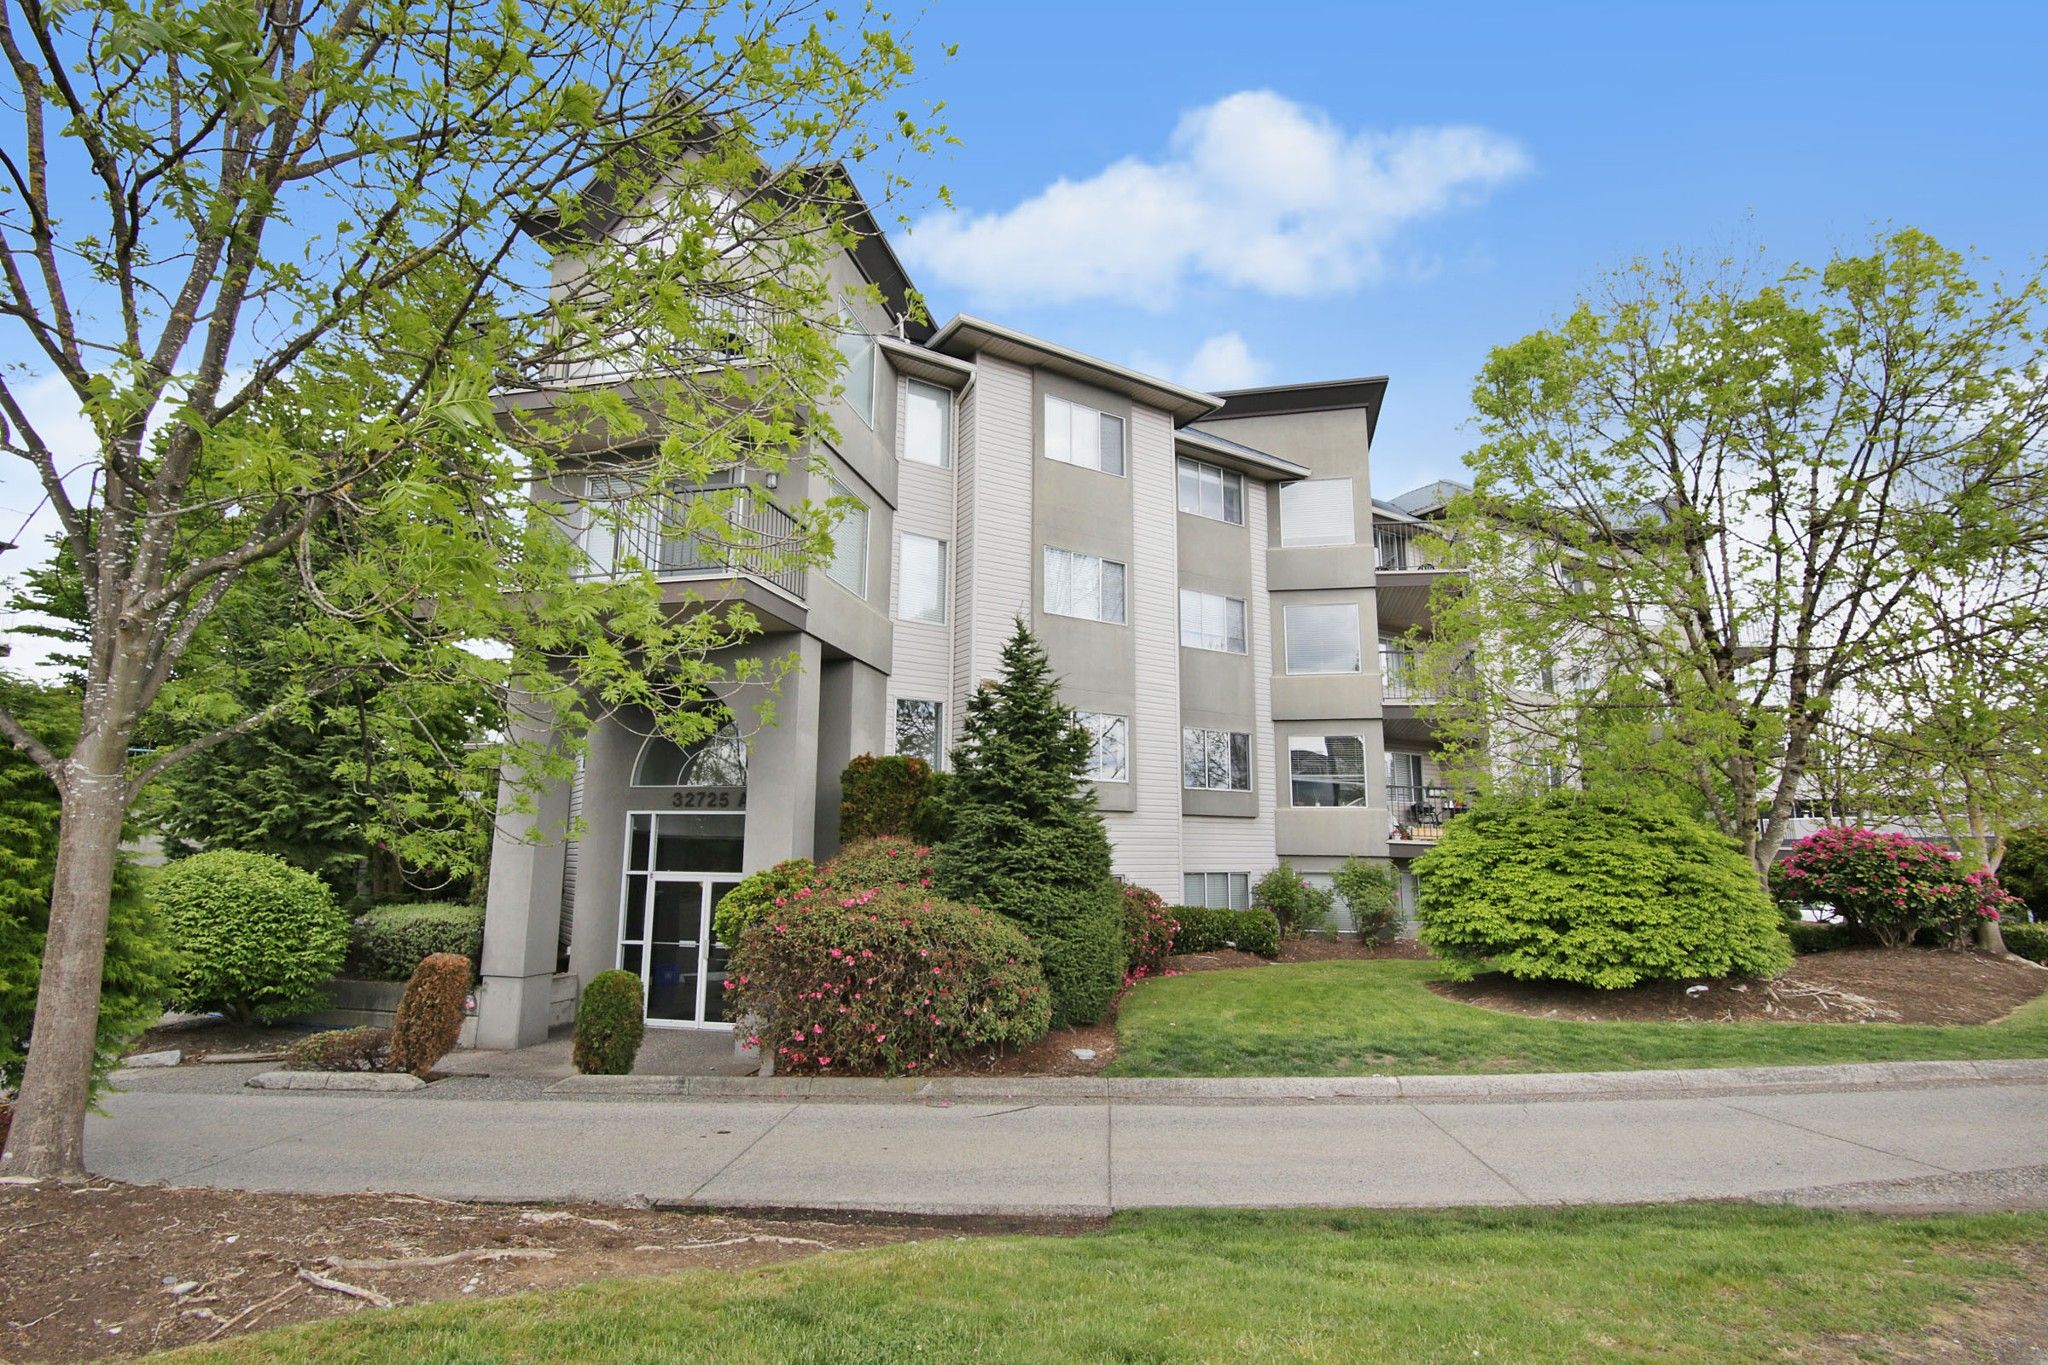 We have sold a property at 303 32725 GEORGE FERGUSON WAY in Abbotsford